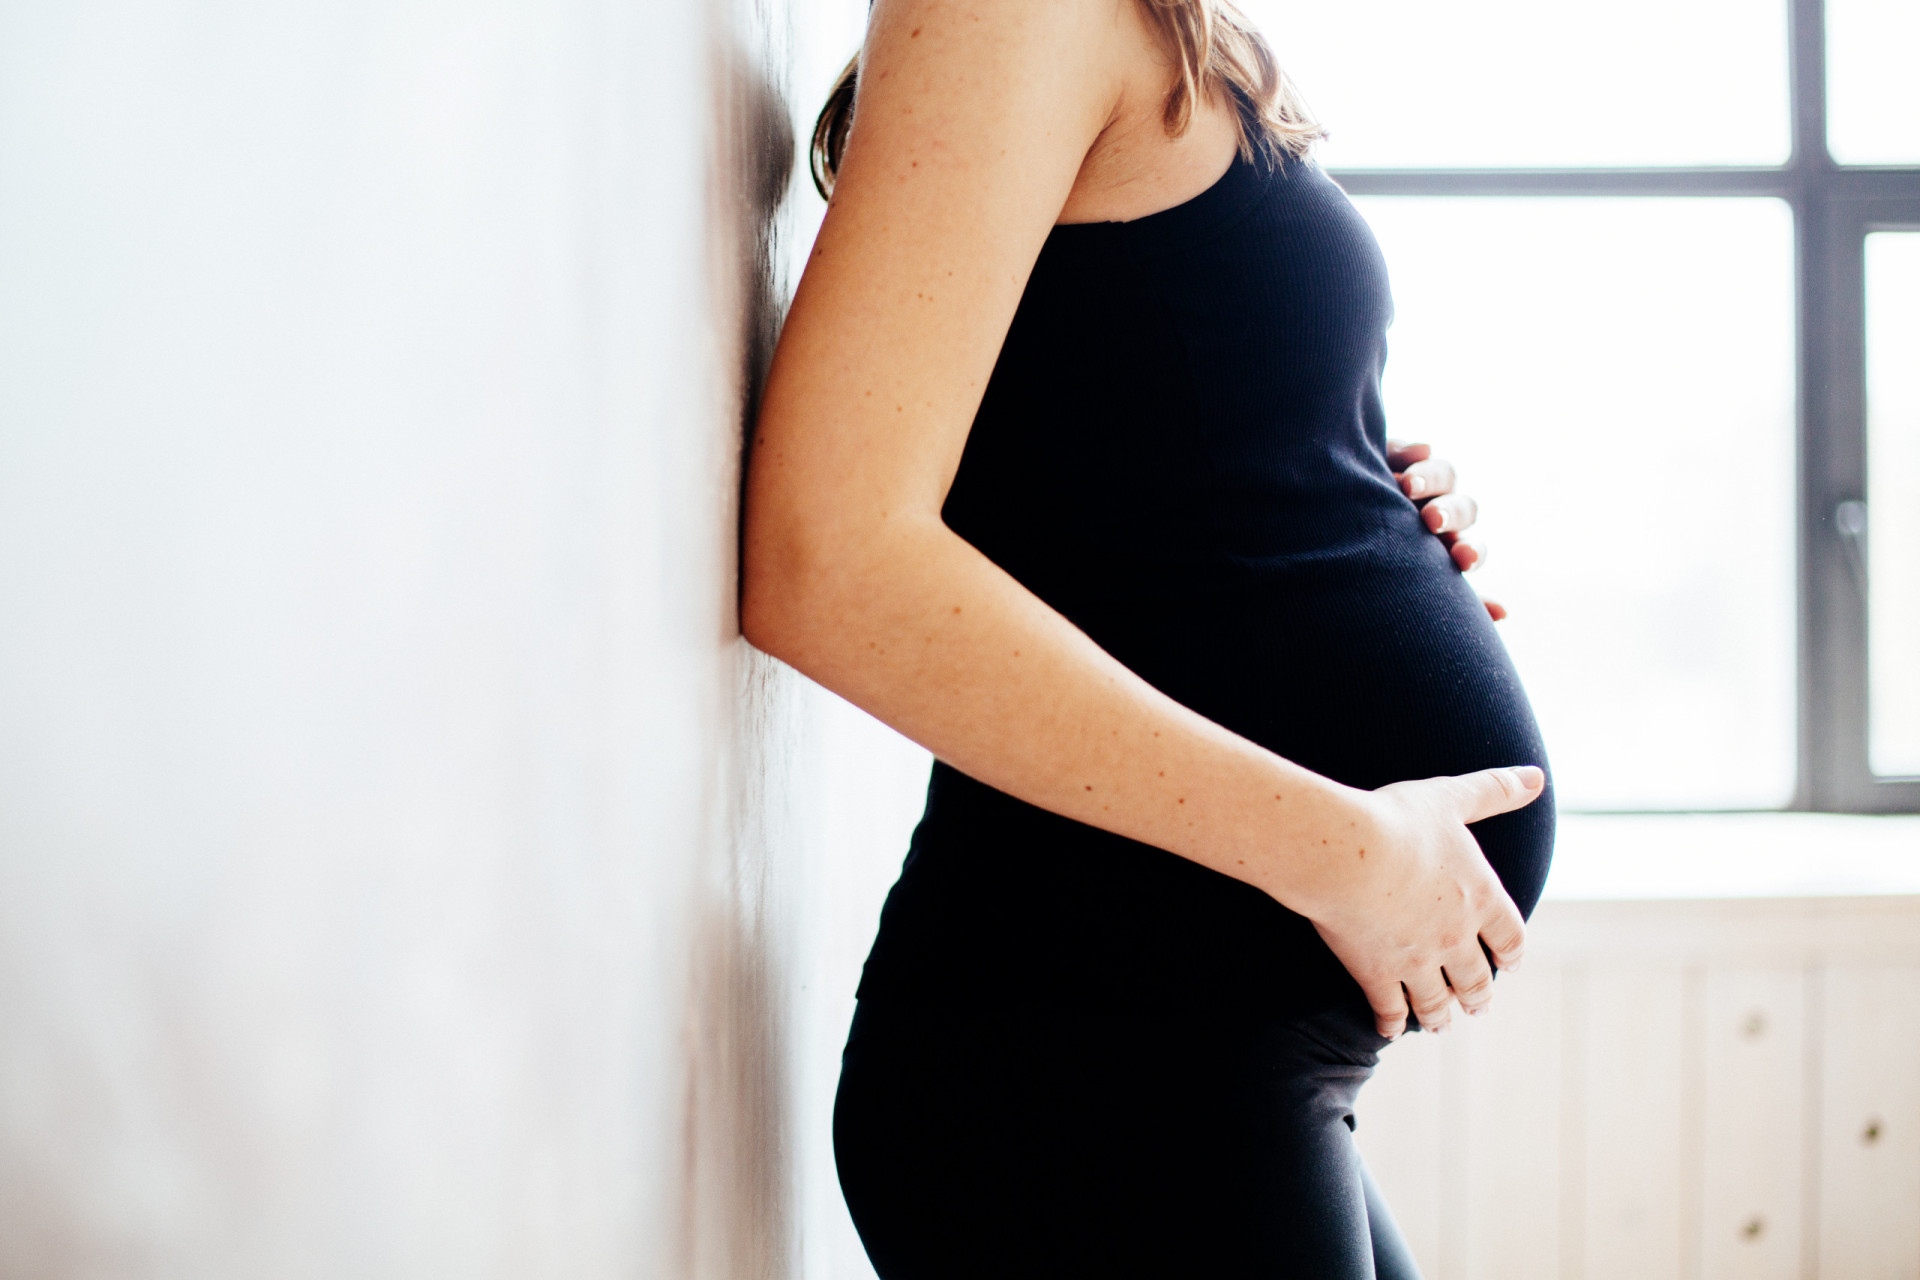 <p>As pregnancy increases the pressure in the veins in the pelvis and legs, DVT is a risk. The risk of blood clots from pregnancy can continue for up to six weeks after a baby is born.</p><p>You may also like:<a href="https://www.starsinsider.com/n/412743?utm_source=msn.com&utm_medium=display&utm_campaign=referral_description&utm_content=540572en-en"> 100 of the famous faces who've passed away in 2019</a></p>